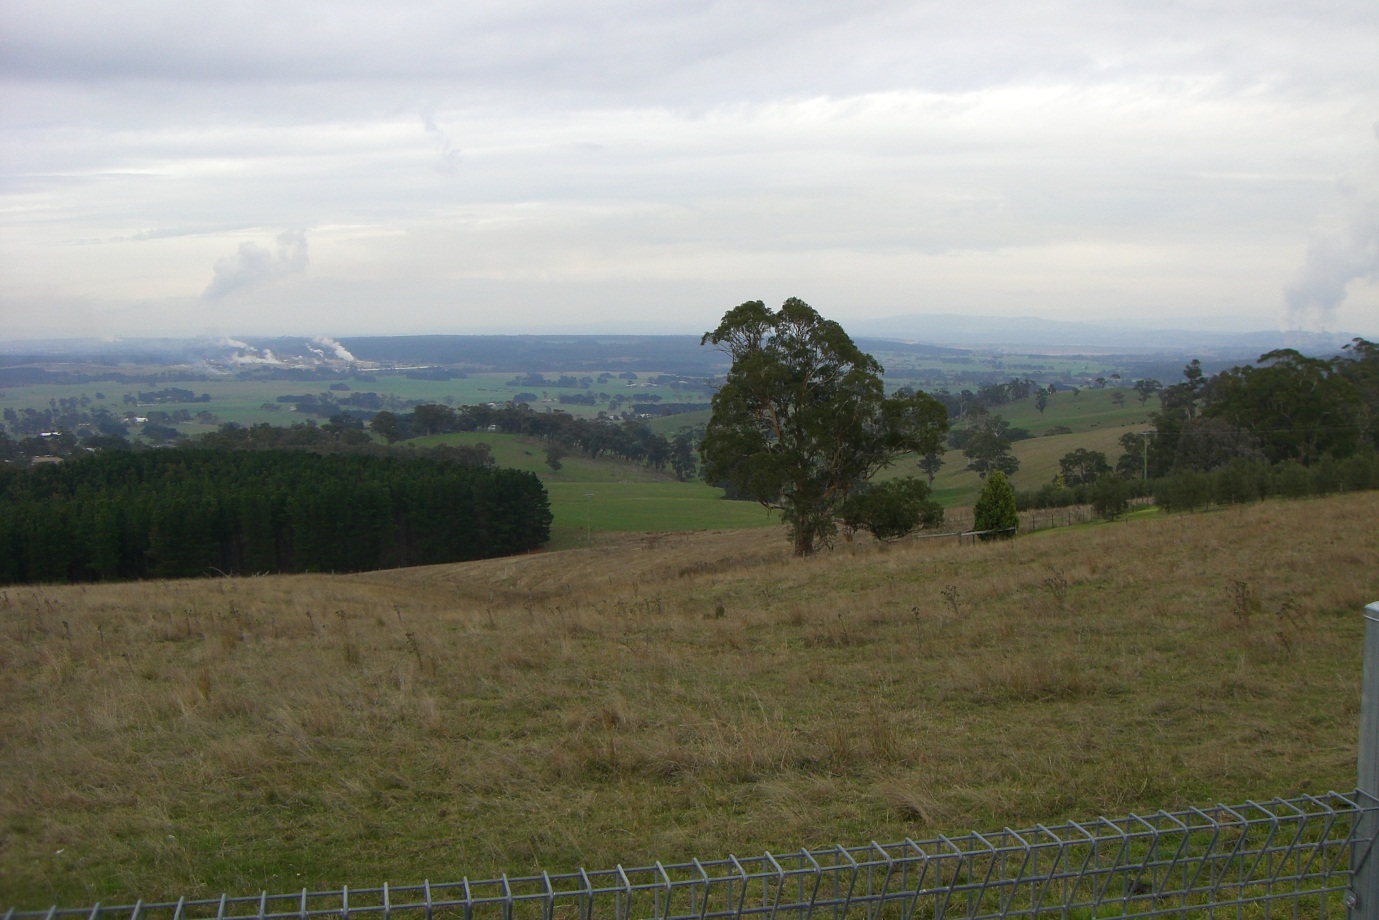 Looking south from Tyer's Lookout over the heavily cleared Gippsland plains.  Photo by Kylie Carman-Brown.